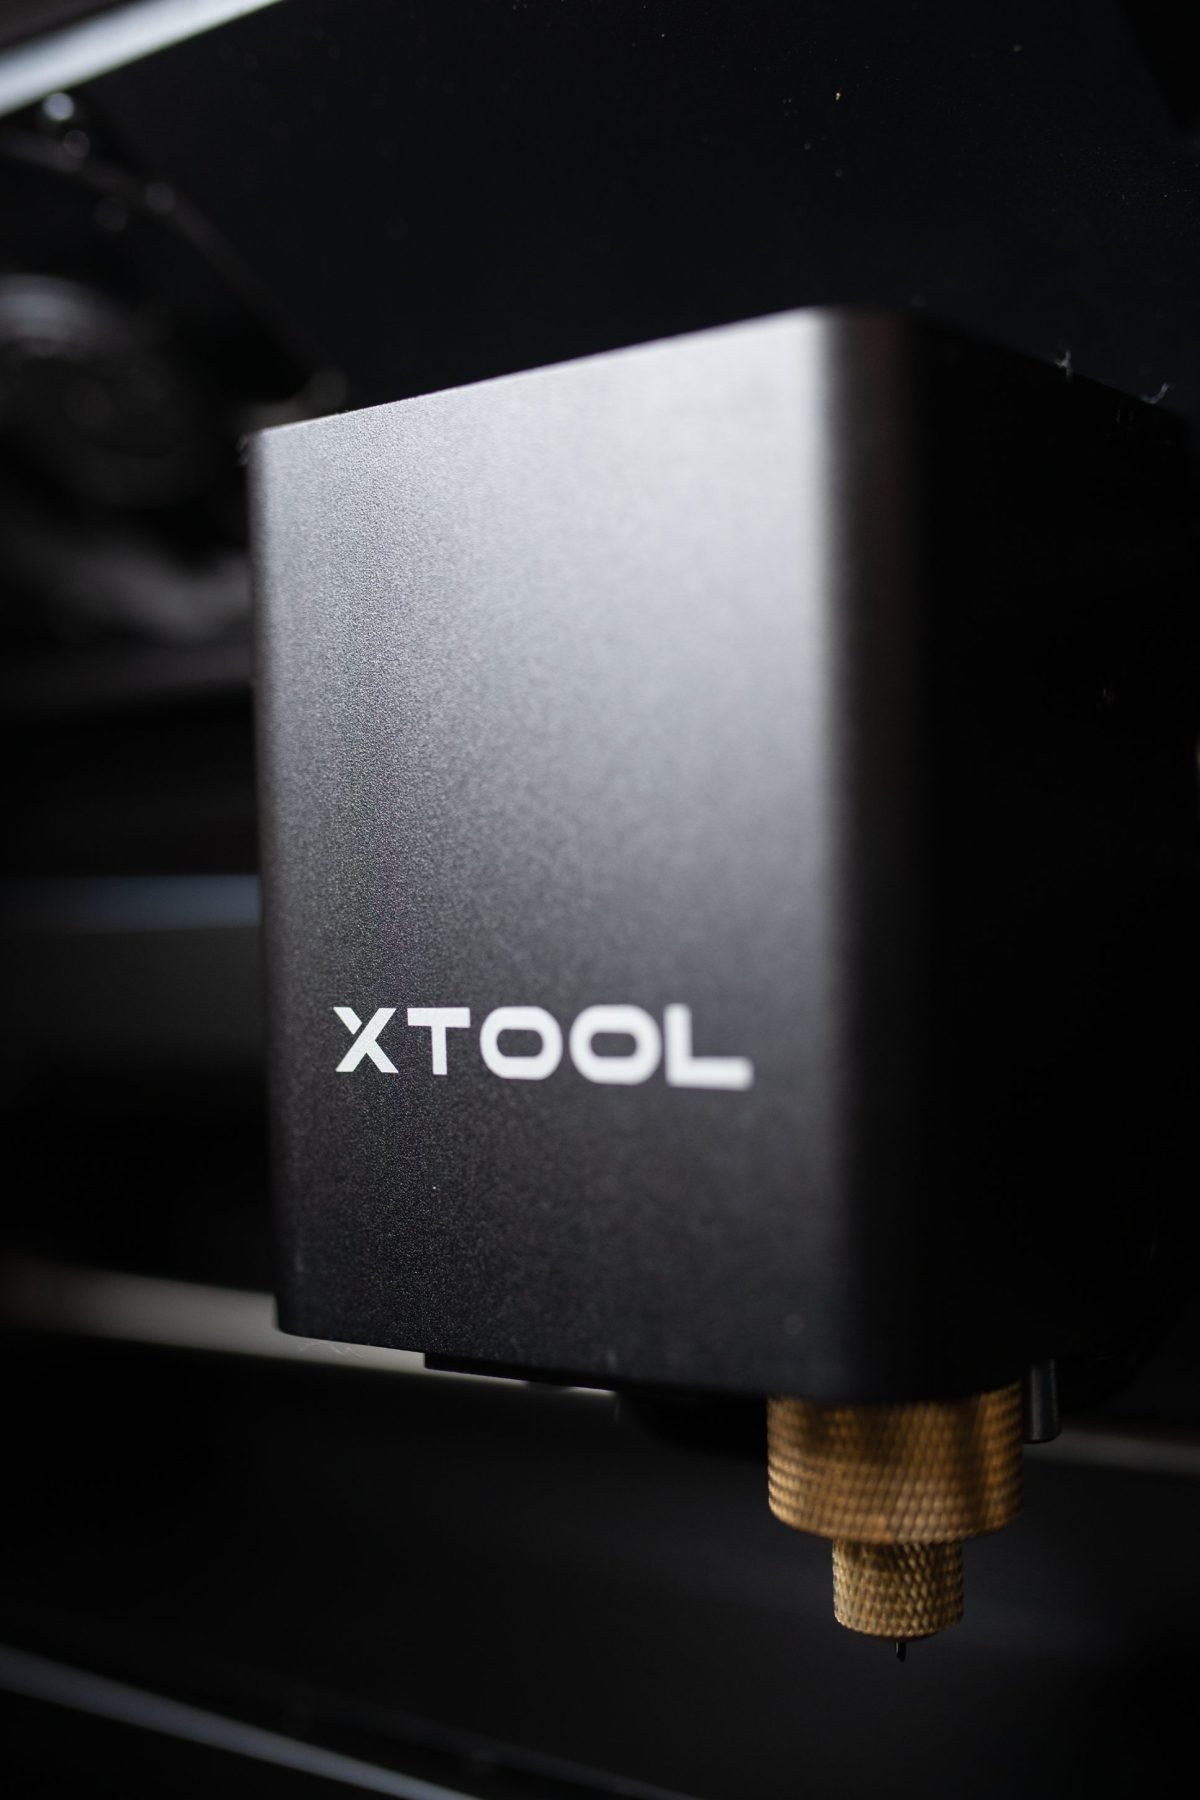 Getting Started With The xTool M1 Laser & Blade Cutting Machine